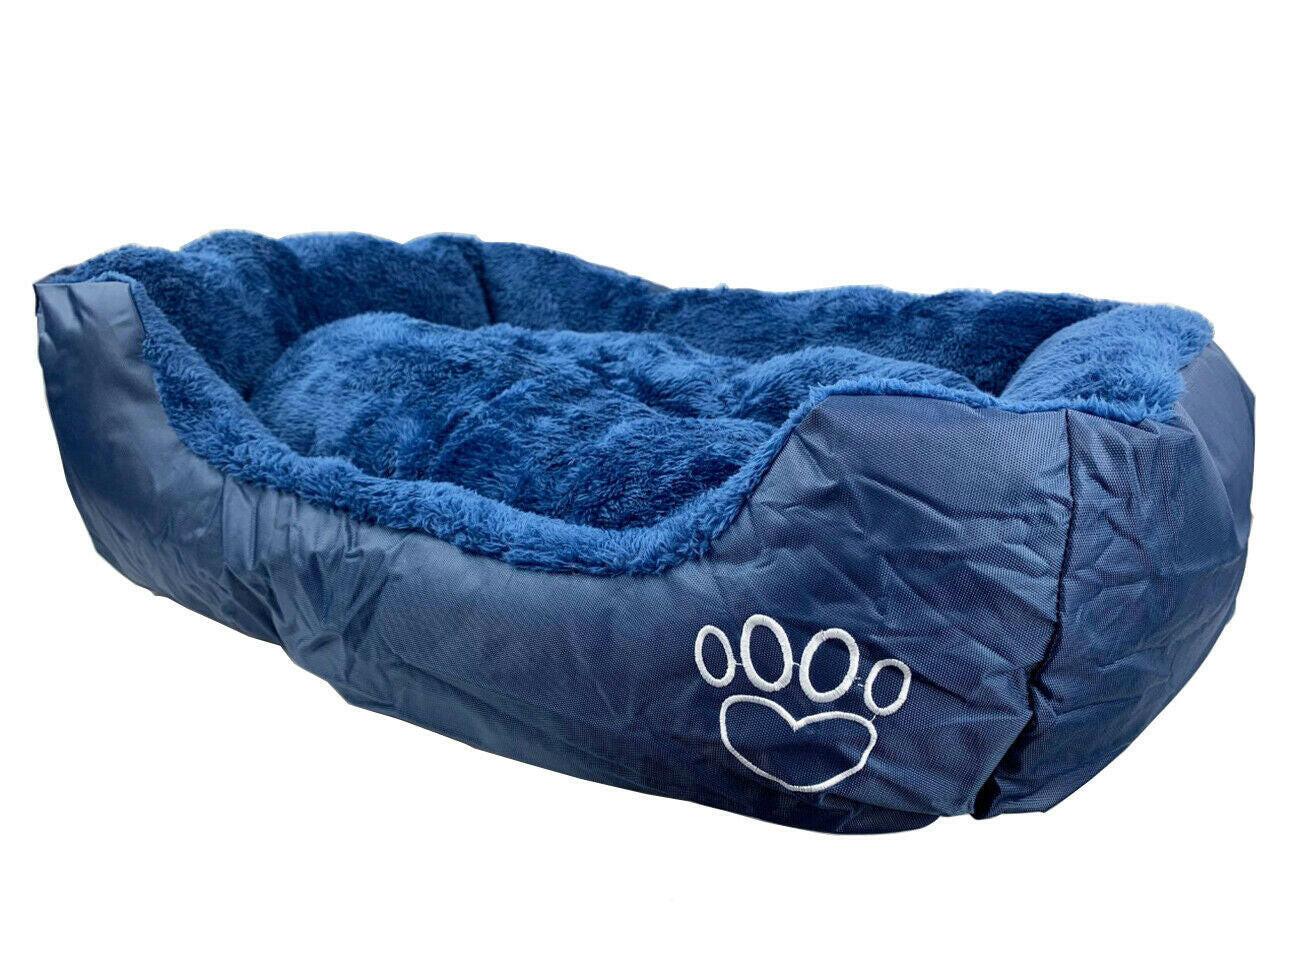 Washable Pet Bed with Soft Comfortable Cushion in Various Sizes (S, M, L, XL)